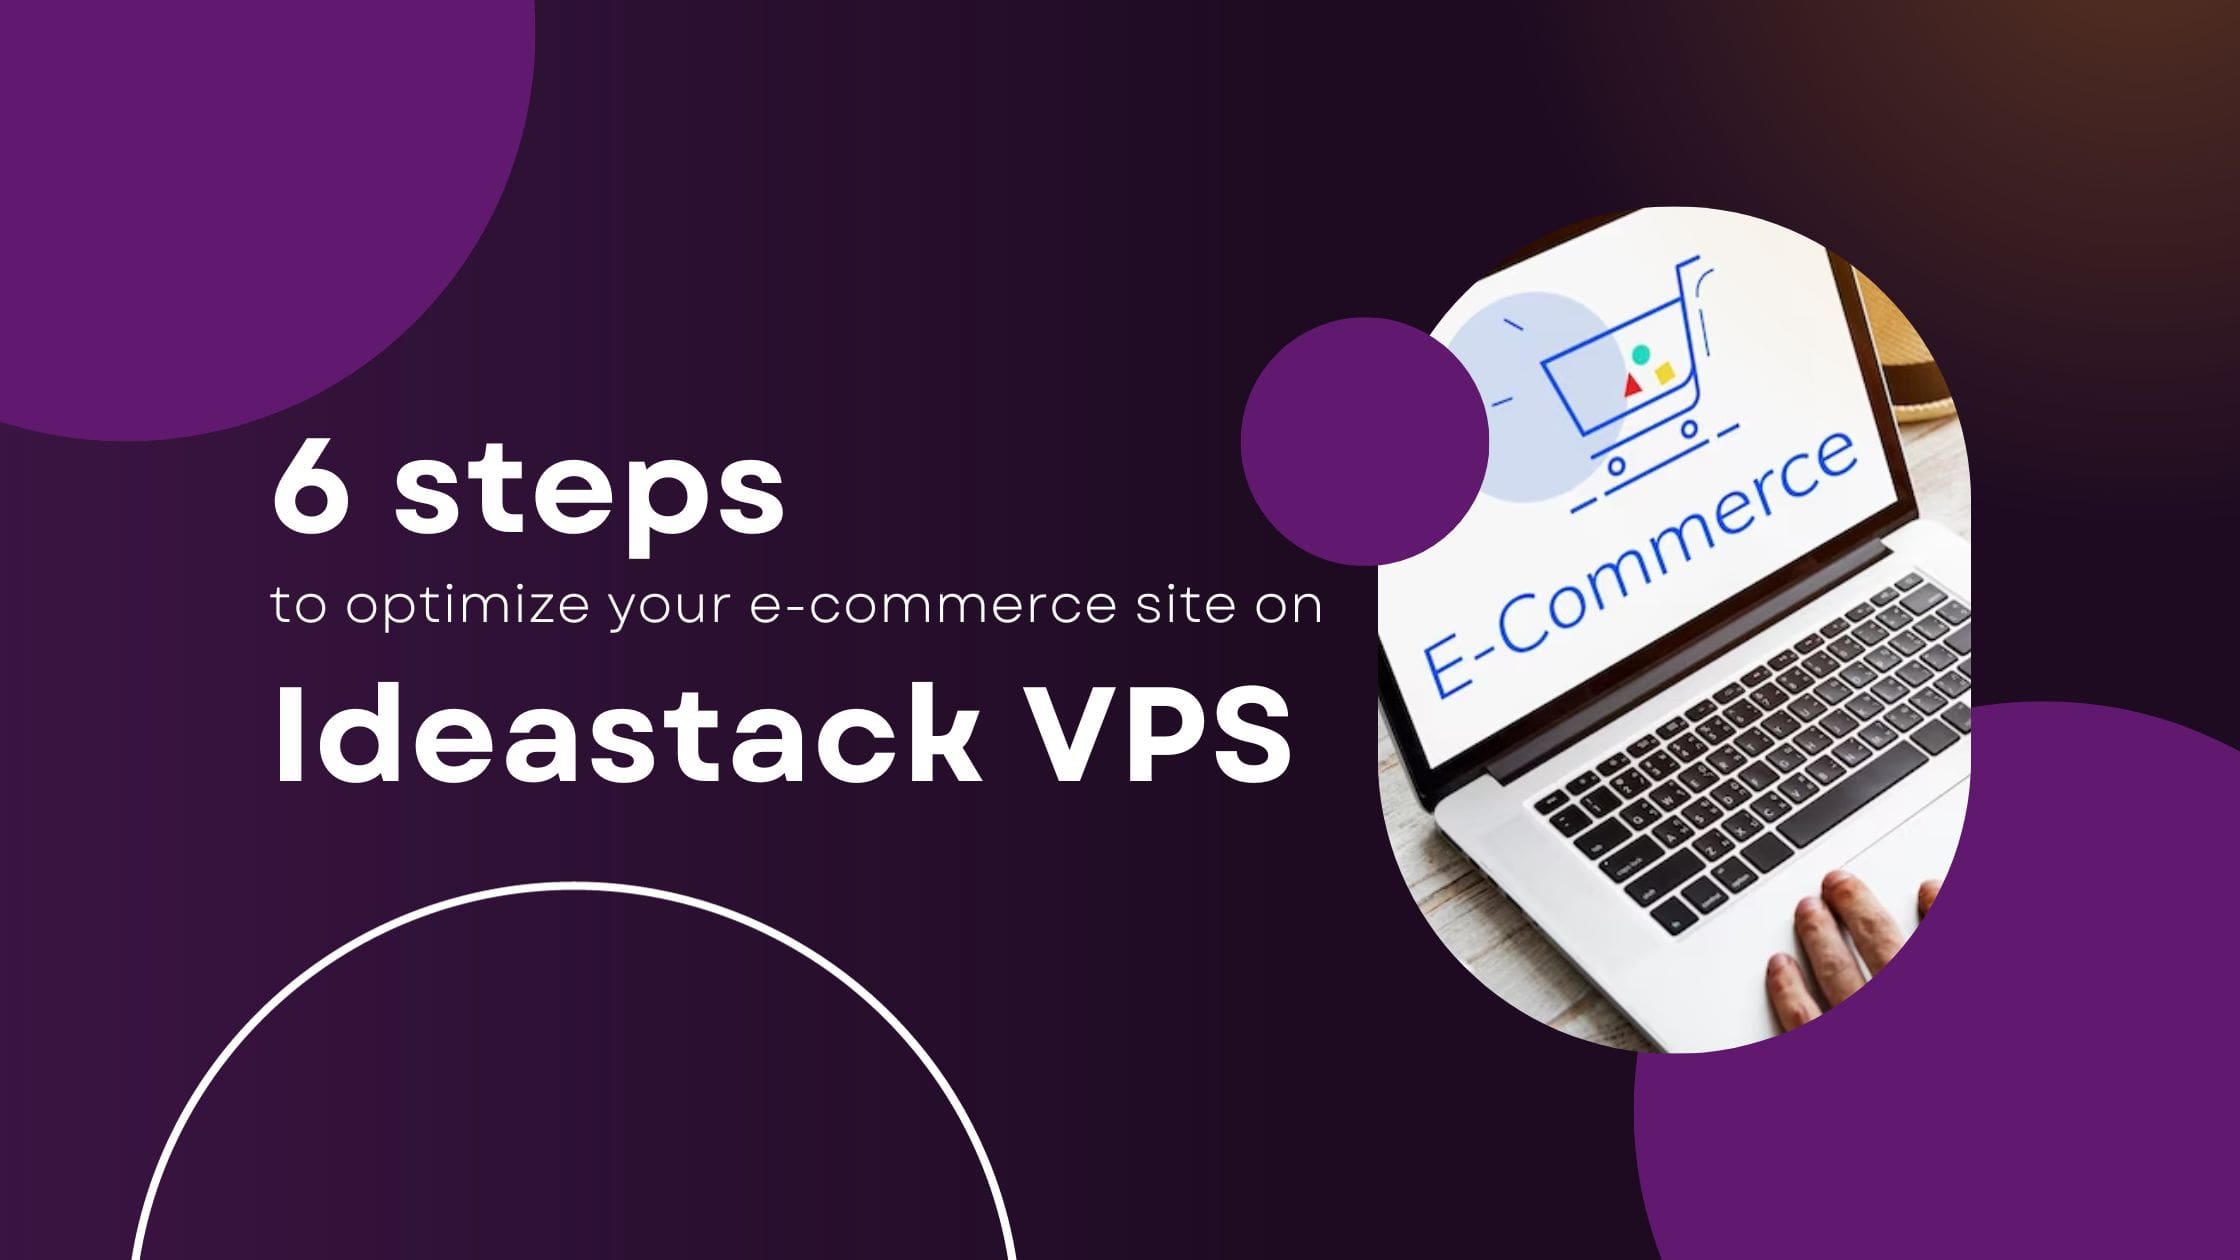 6 steps to optimize your e-commerce site on Ideastack VPS